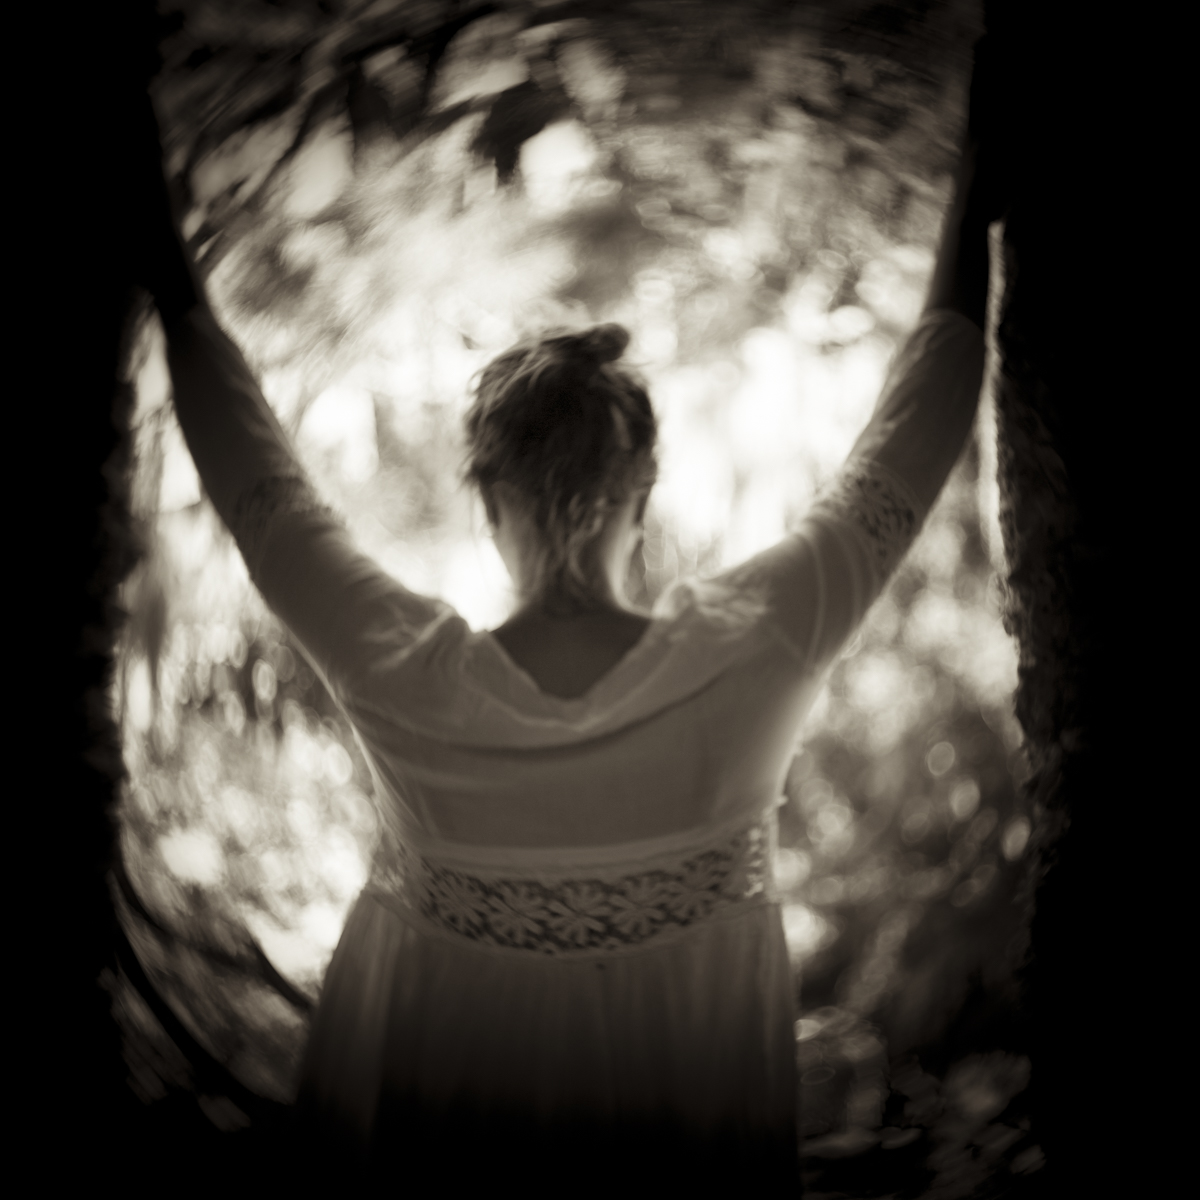 A woman holds her arms up and has her back towards us. A strong light makes a silhouette of her upper body.